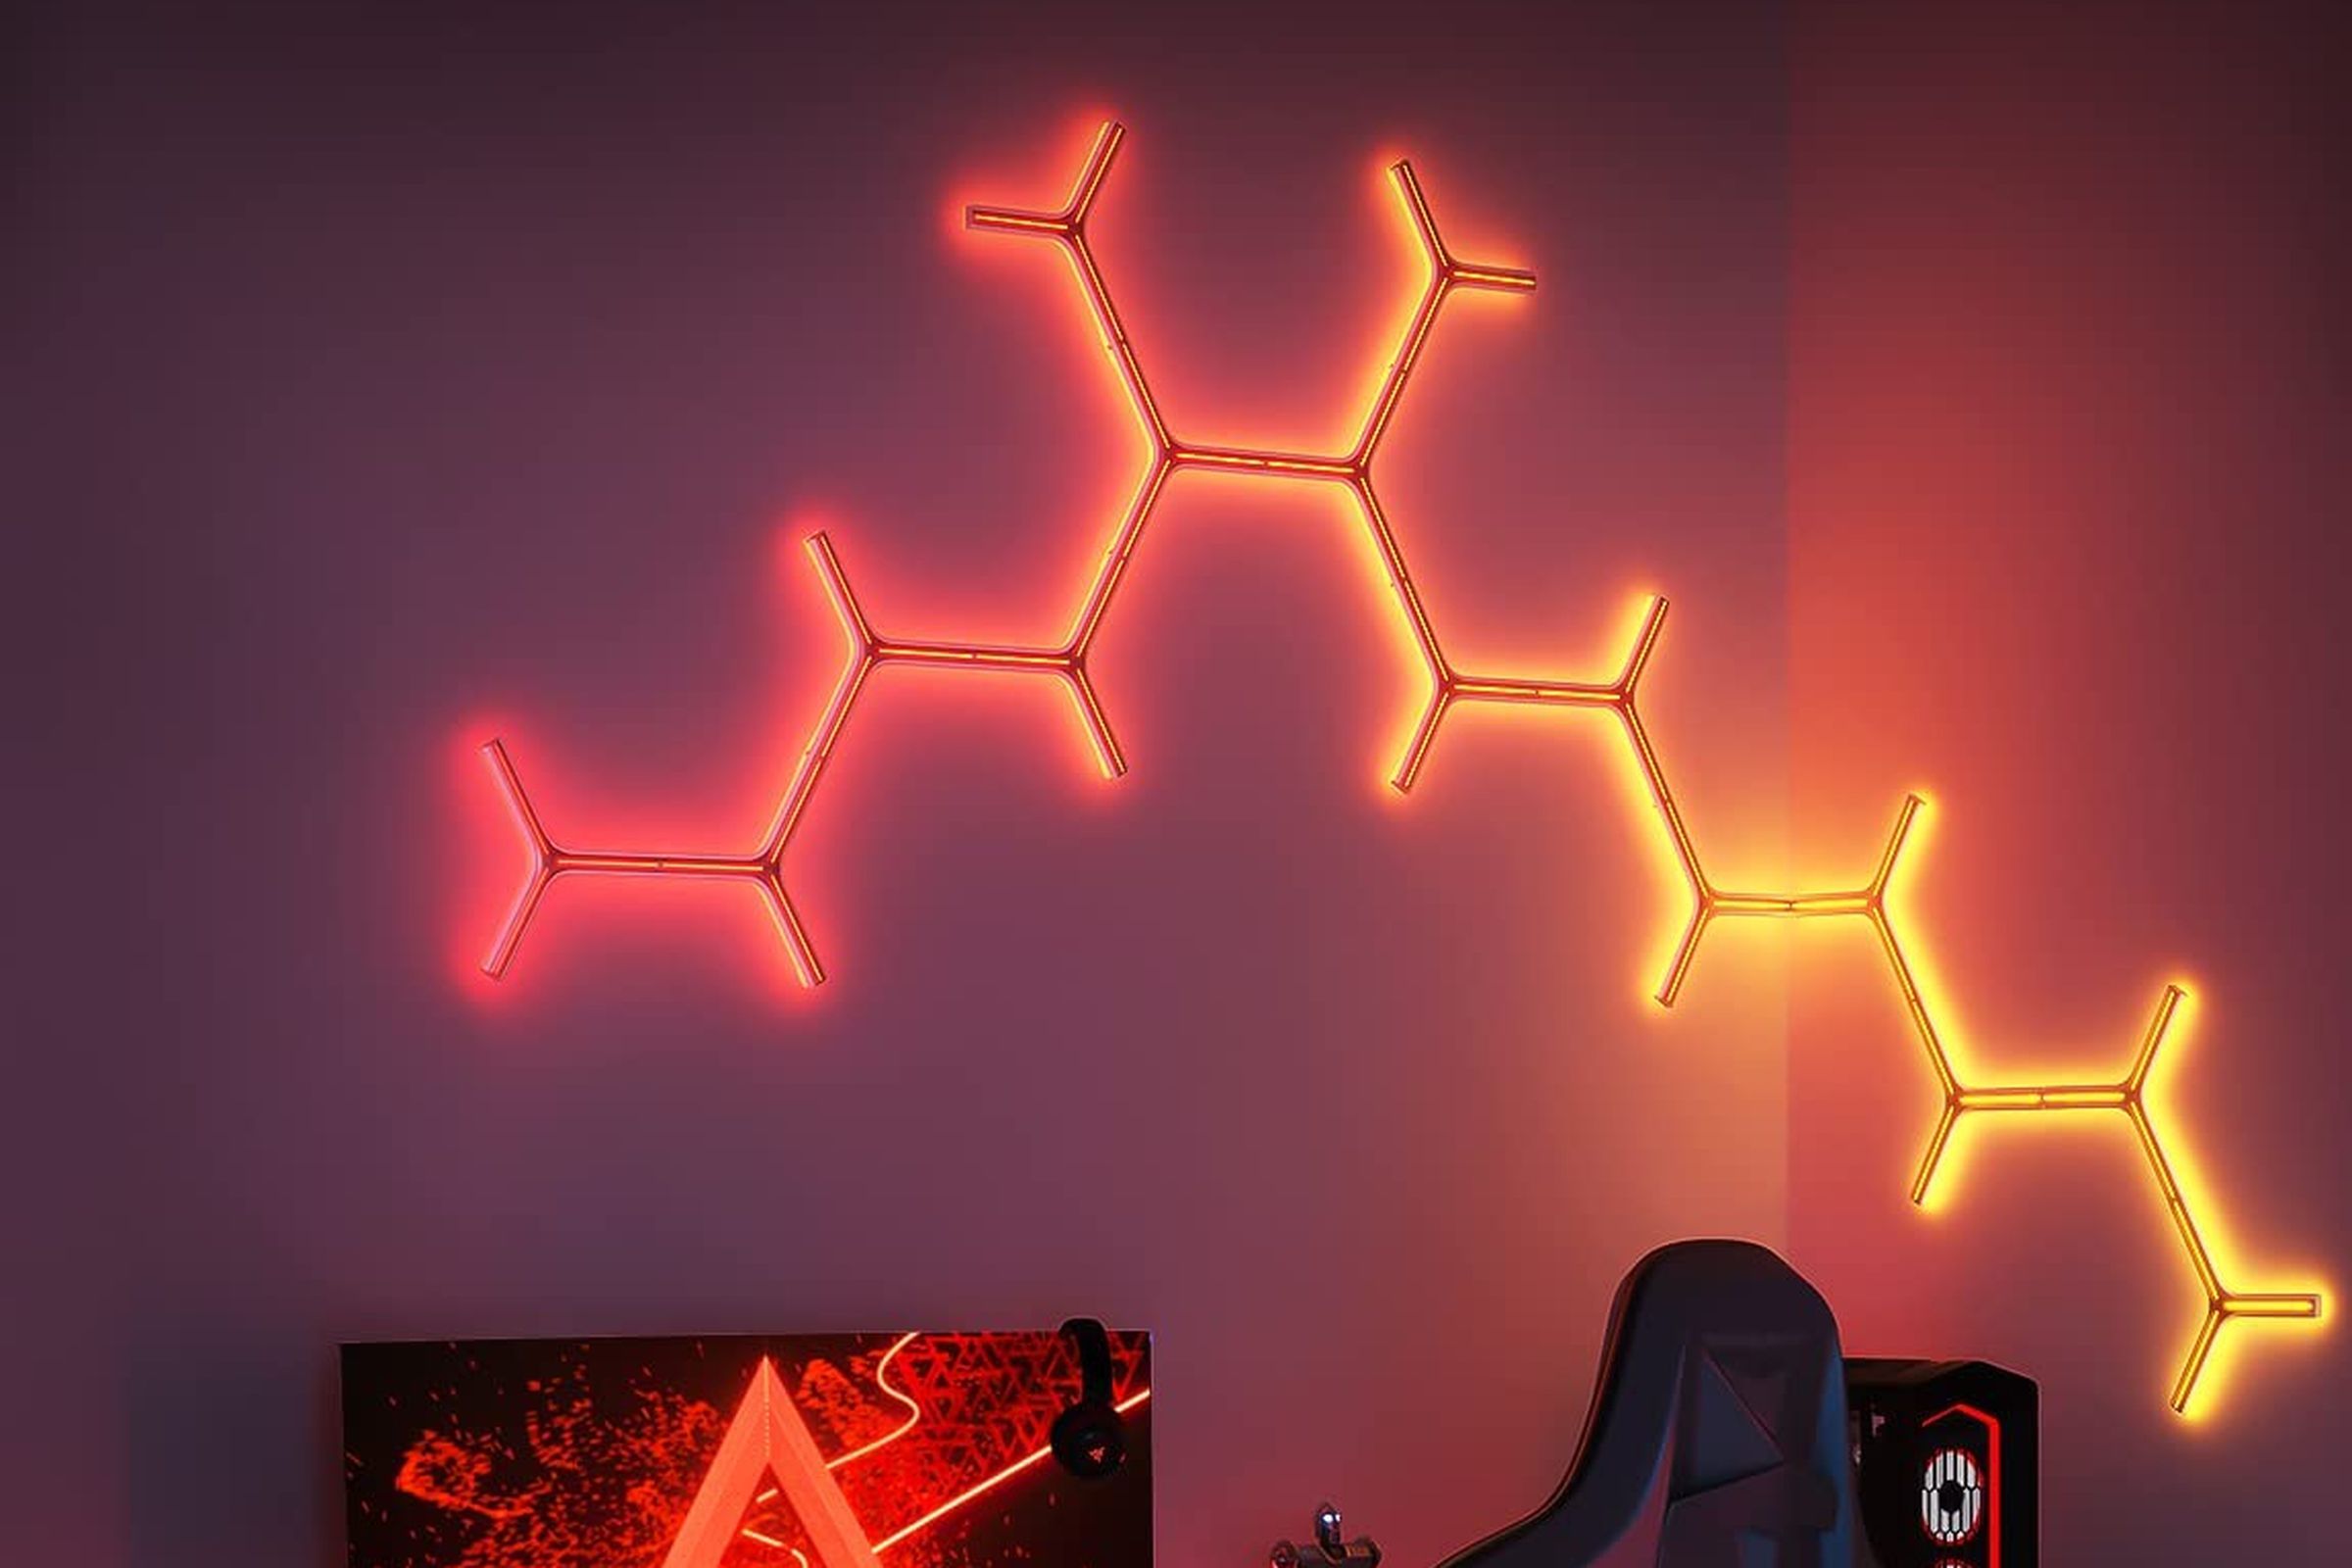 A selection of Govee’s Glide Y Lights illuminating the wall above a computer with a red glow.